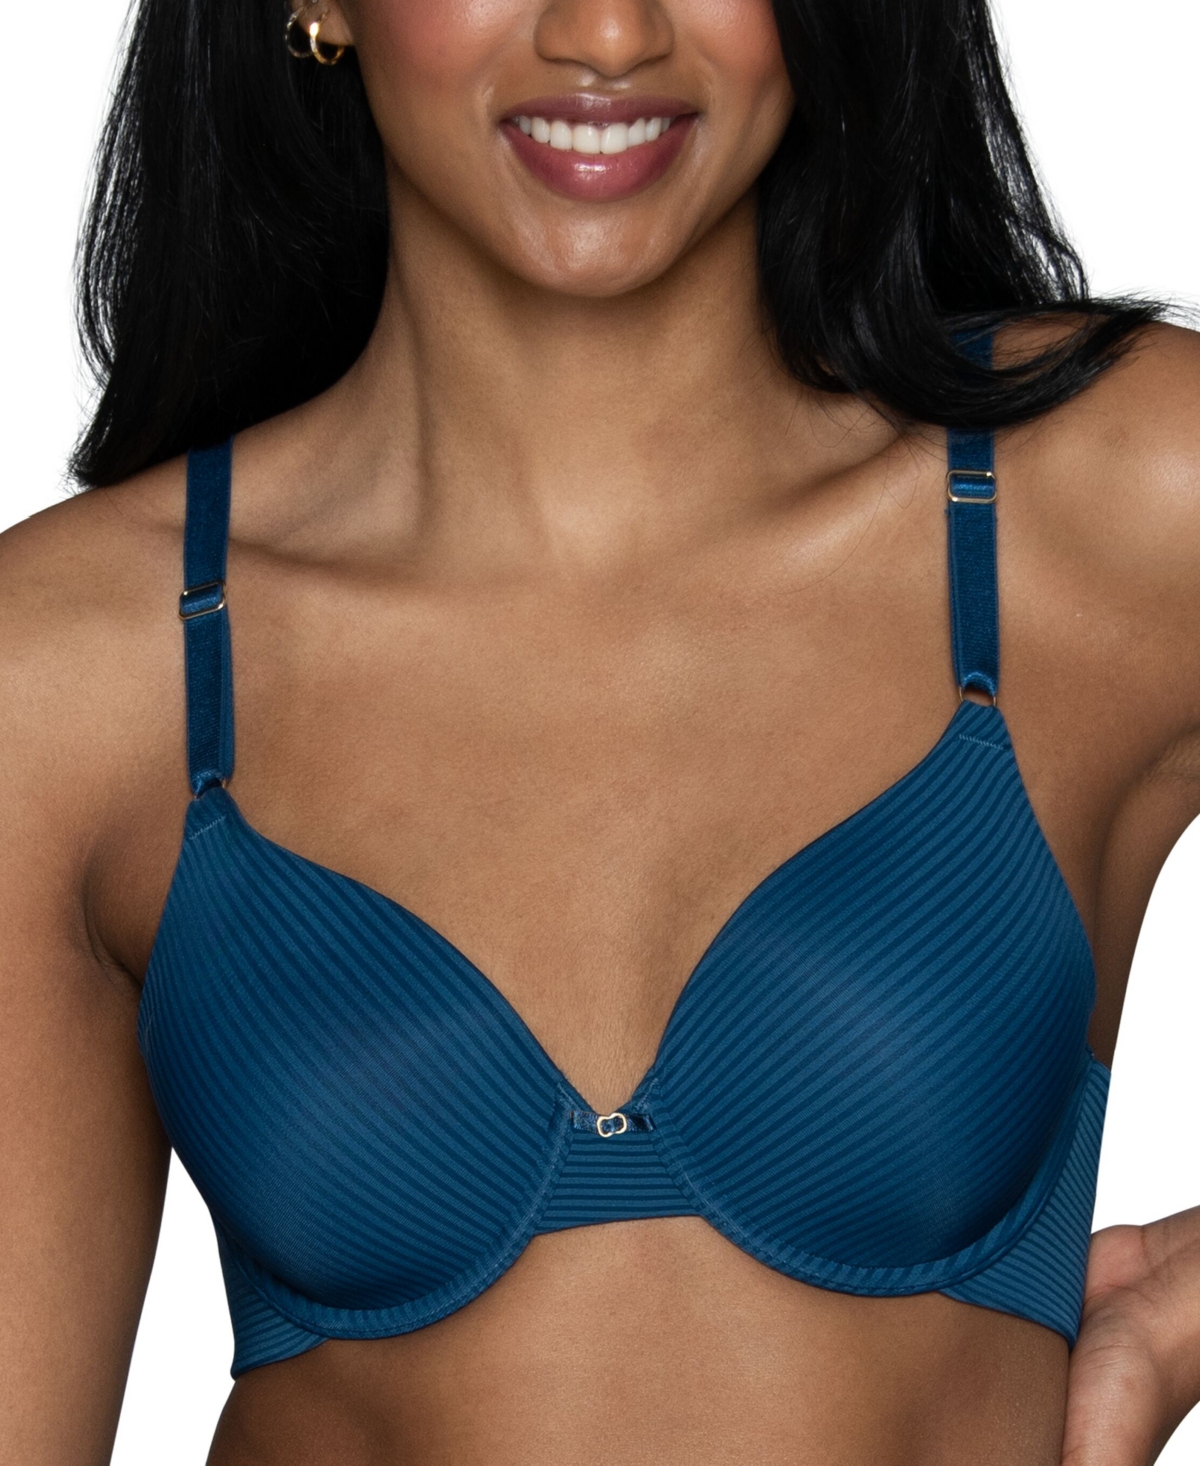 Vanity Fair Women's Beauty Back Full Coverage Underwire Smoothing